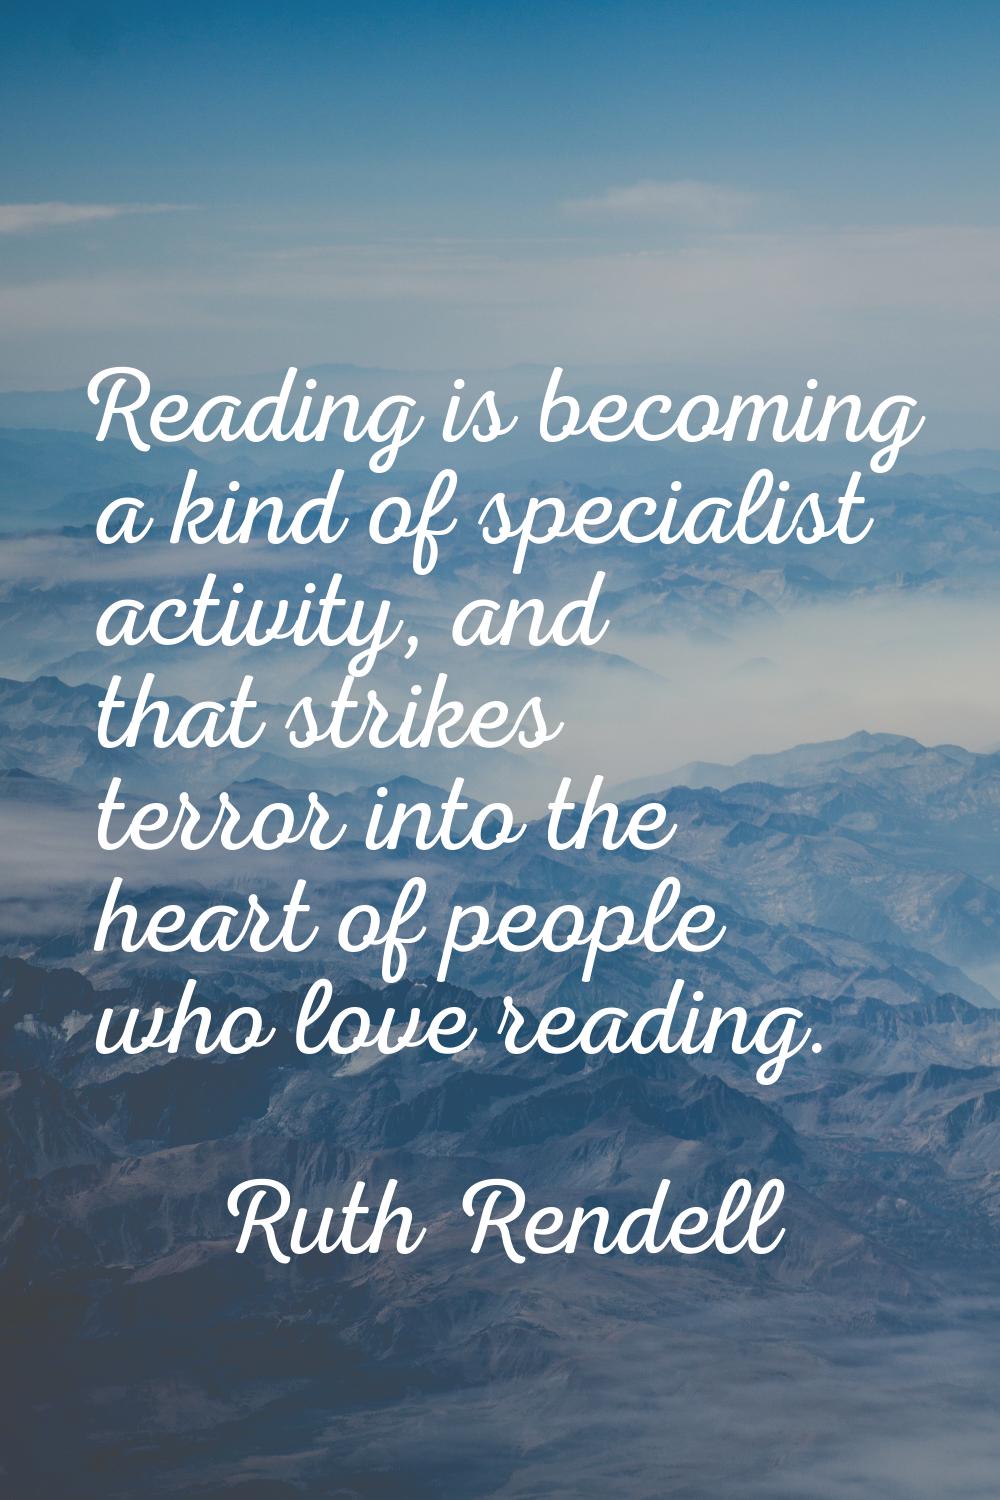 Reading is becoming a kind of specialist activity, and that strikes terror into the heart of people